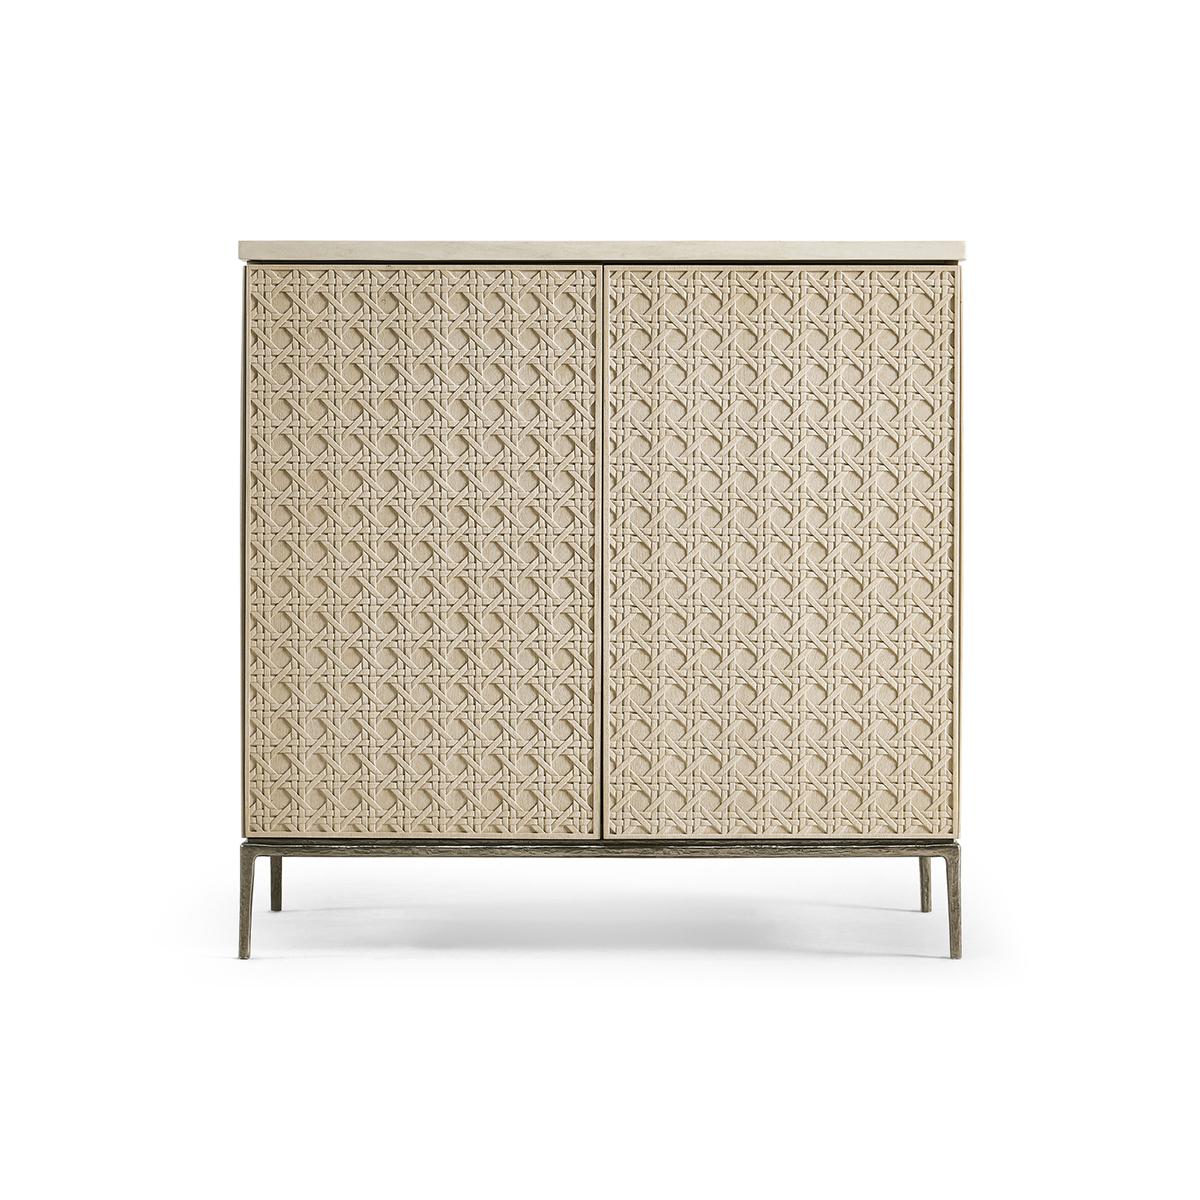 This carved woven Credenza is a stunning example of craftsmanship and design, perfect for adding a touch of tropical glamour to your home.

The digitally carved, traditional woven cane design on the cabinet doors is nothing short of mesmerizing.